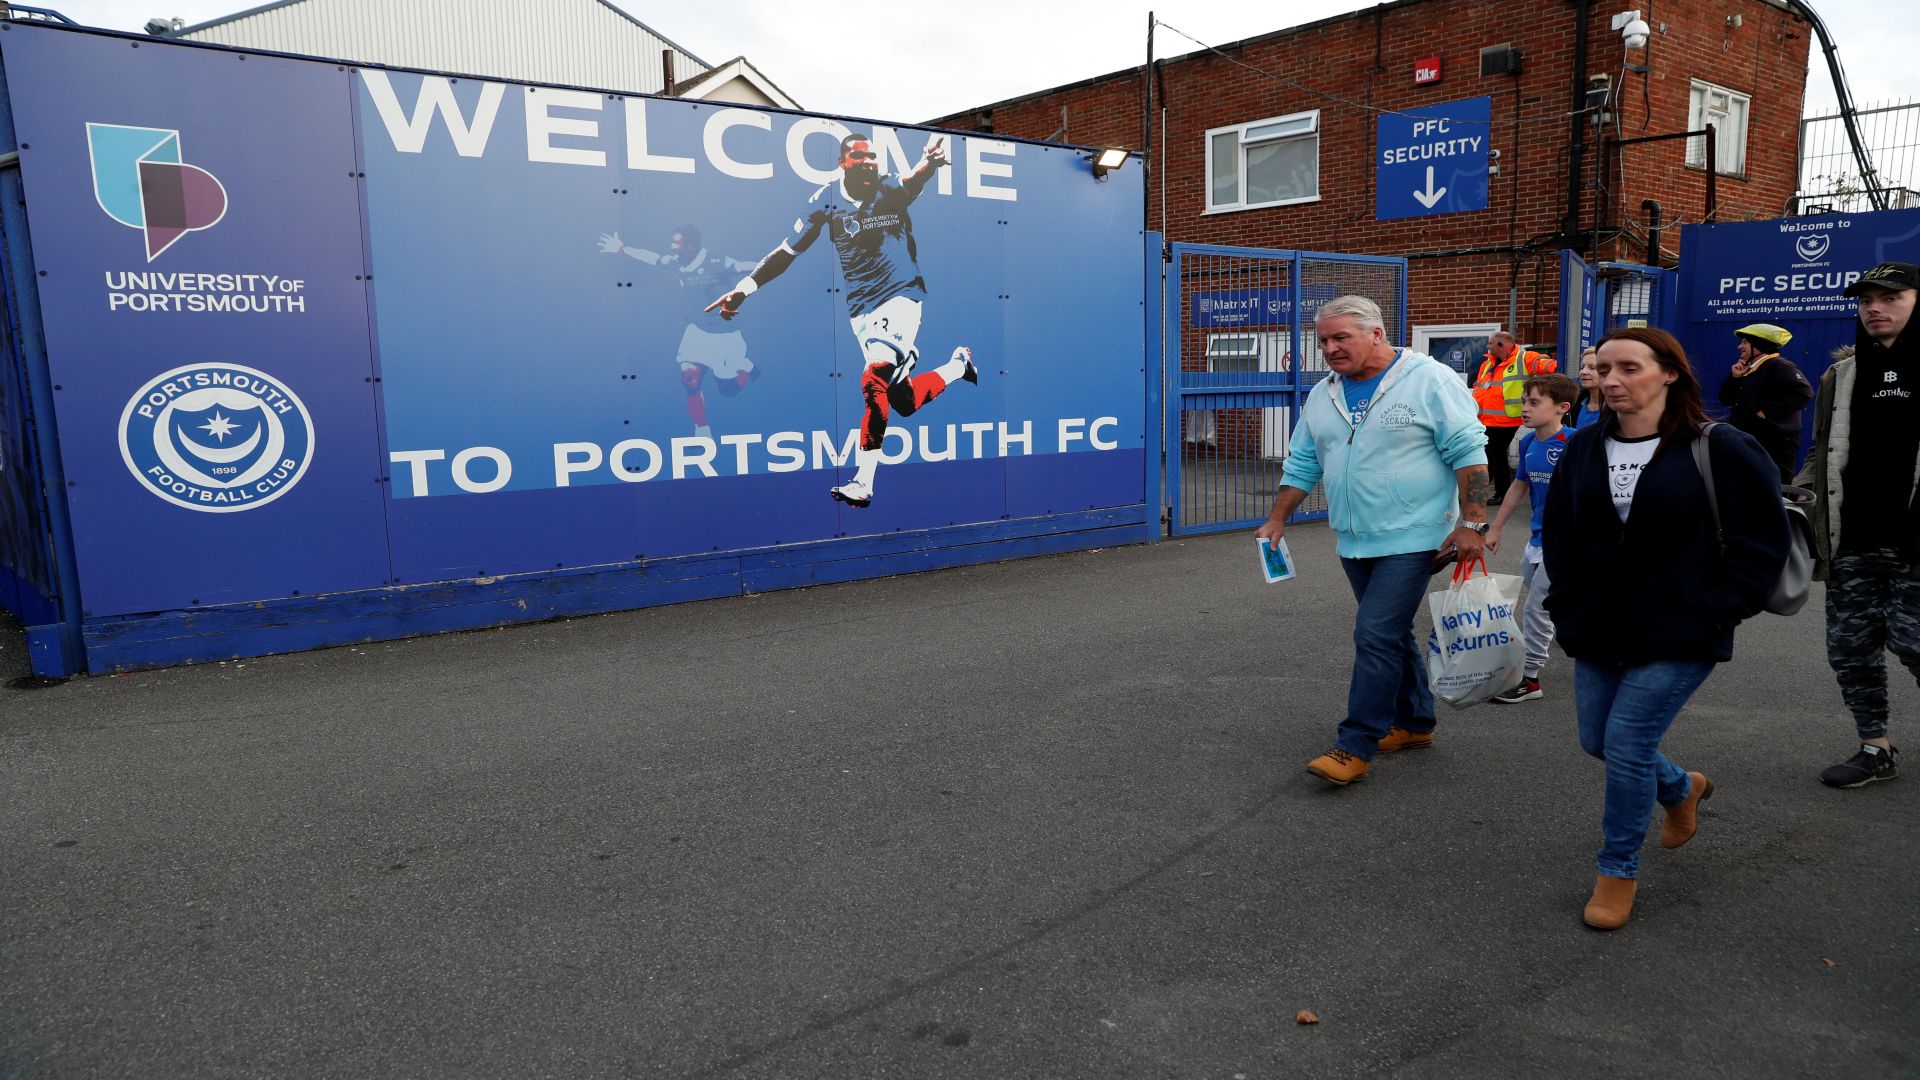 portsmouth fans entering the ground